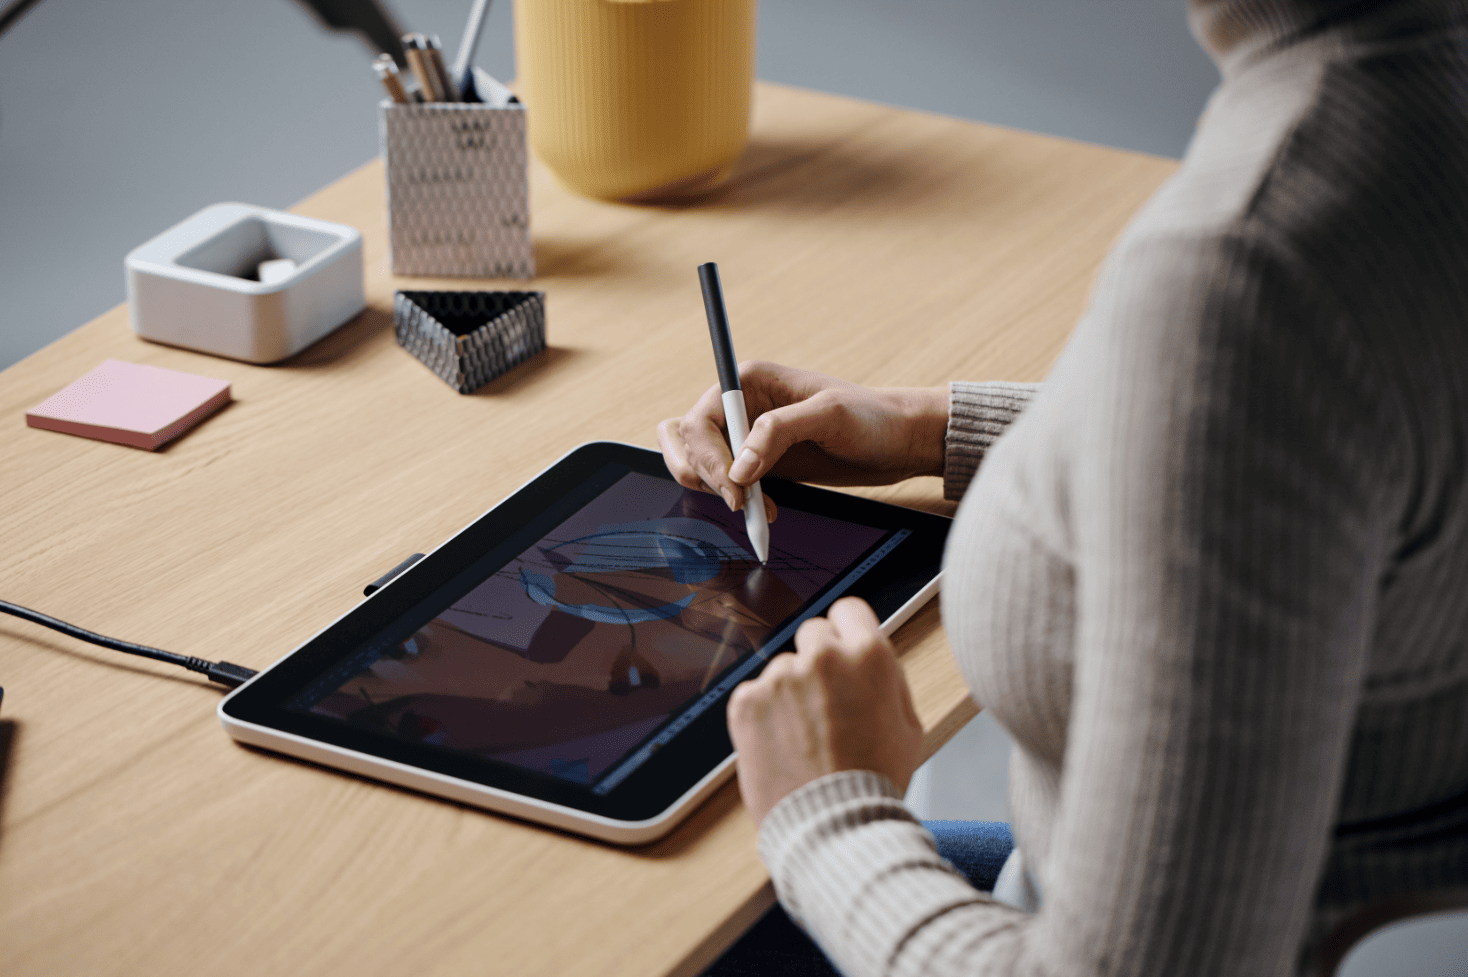 Getting Started with Digital Drawing: An accessible beginner’s Guide